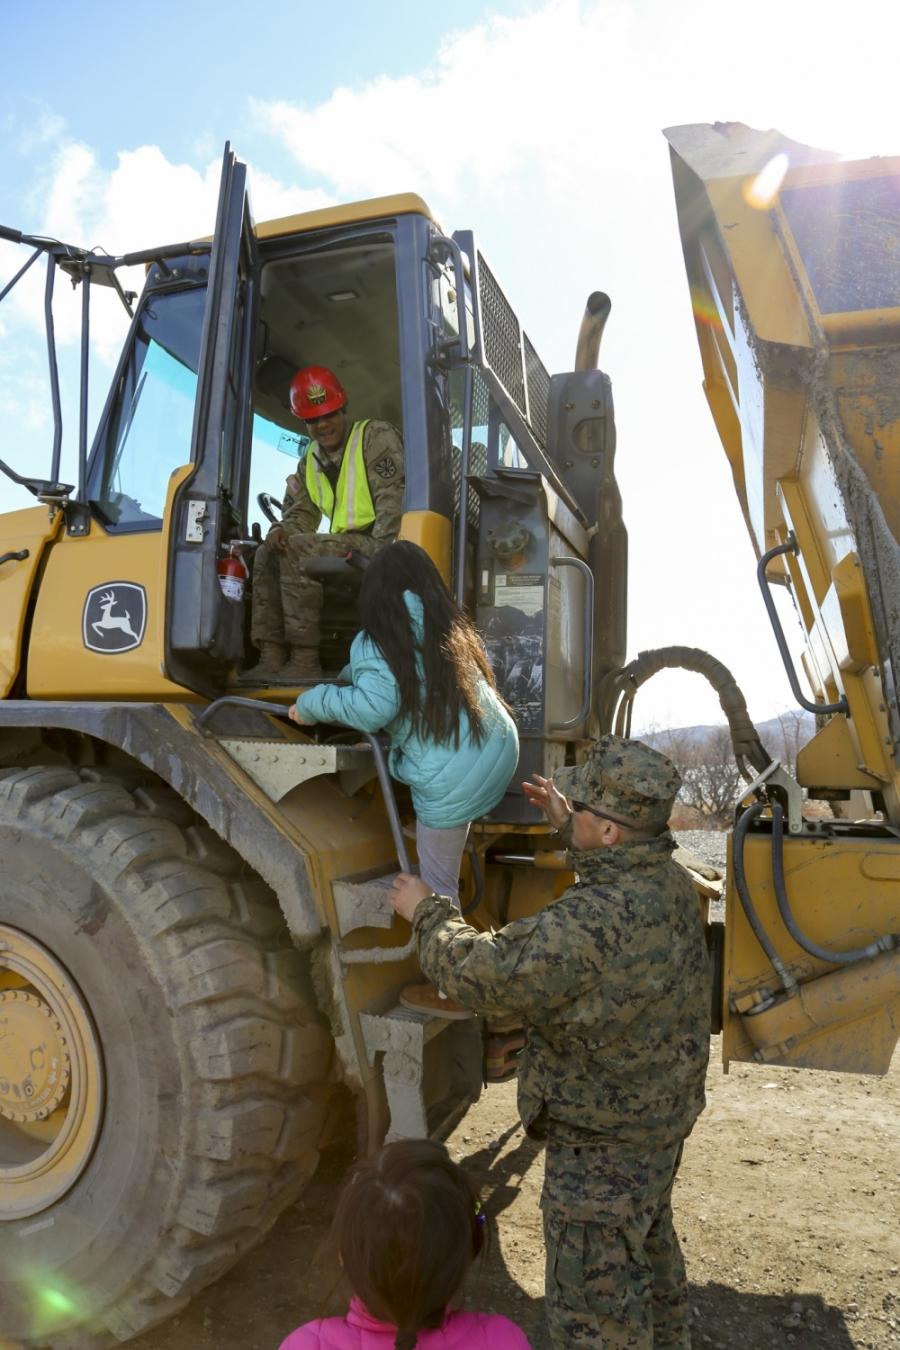 Chief Warrant Officer 3 Jason Garcia, a project coordinator for Innovative Readiness Training Old Harbor, who is with the Marine Corps Wing Support Squadron 471st Marine Aircraft Wing, U.S. Marine Corps Forces Reserve, loads a local school student into a rock truck driven by an Arizona National Guardsman from the 259th Engineer Platoon during their visit to the Innovative Readiness Training runway extension project at Old Harbor, Alaska.
(Staff Sgt. Balinda O’Neal Dresel photo)